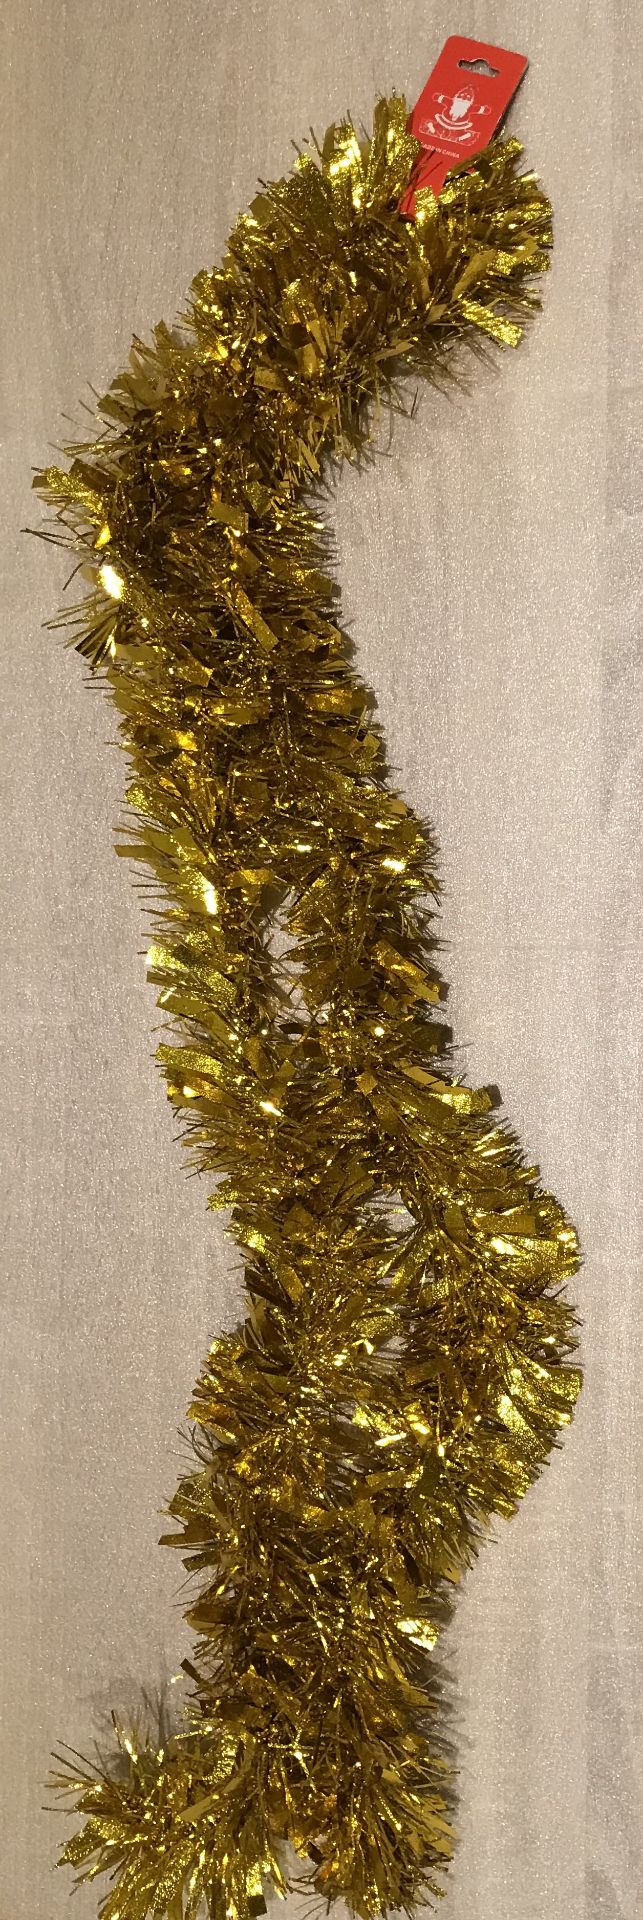 500 X Luxury Tinsel 1.8M 5 Colours Gold, Silver, Red, Blue, Green - Image 2 of 6